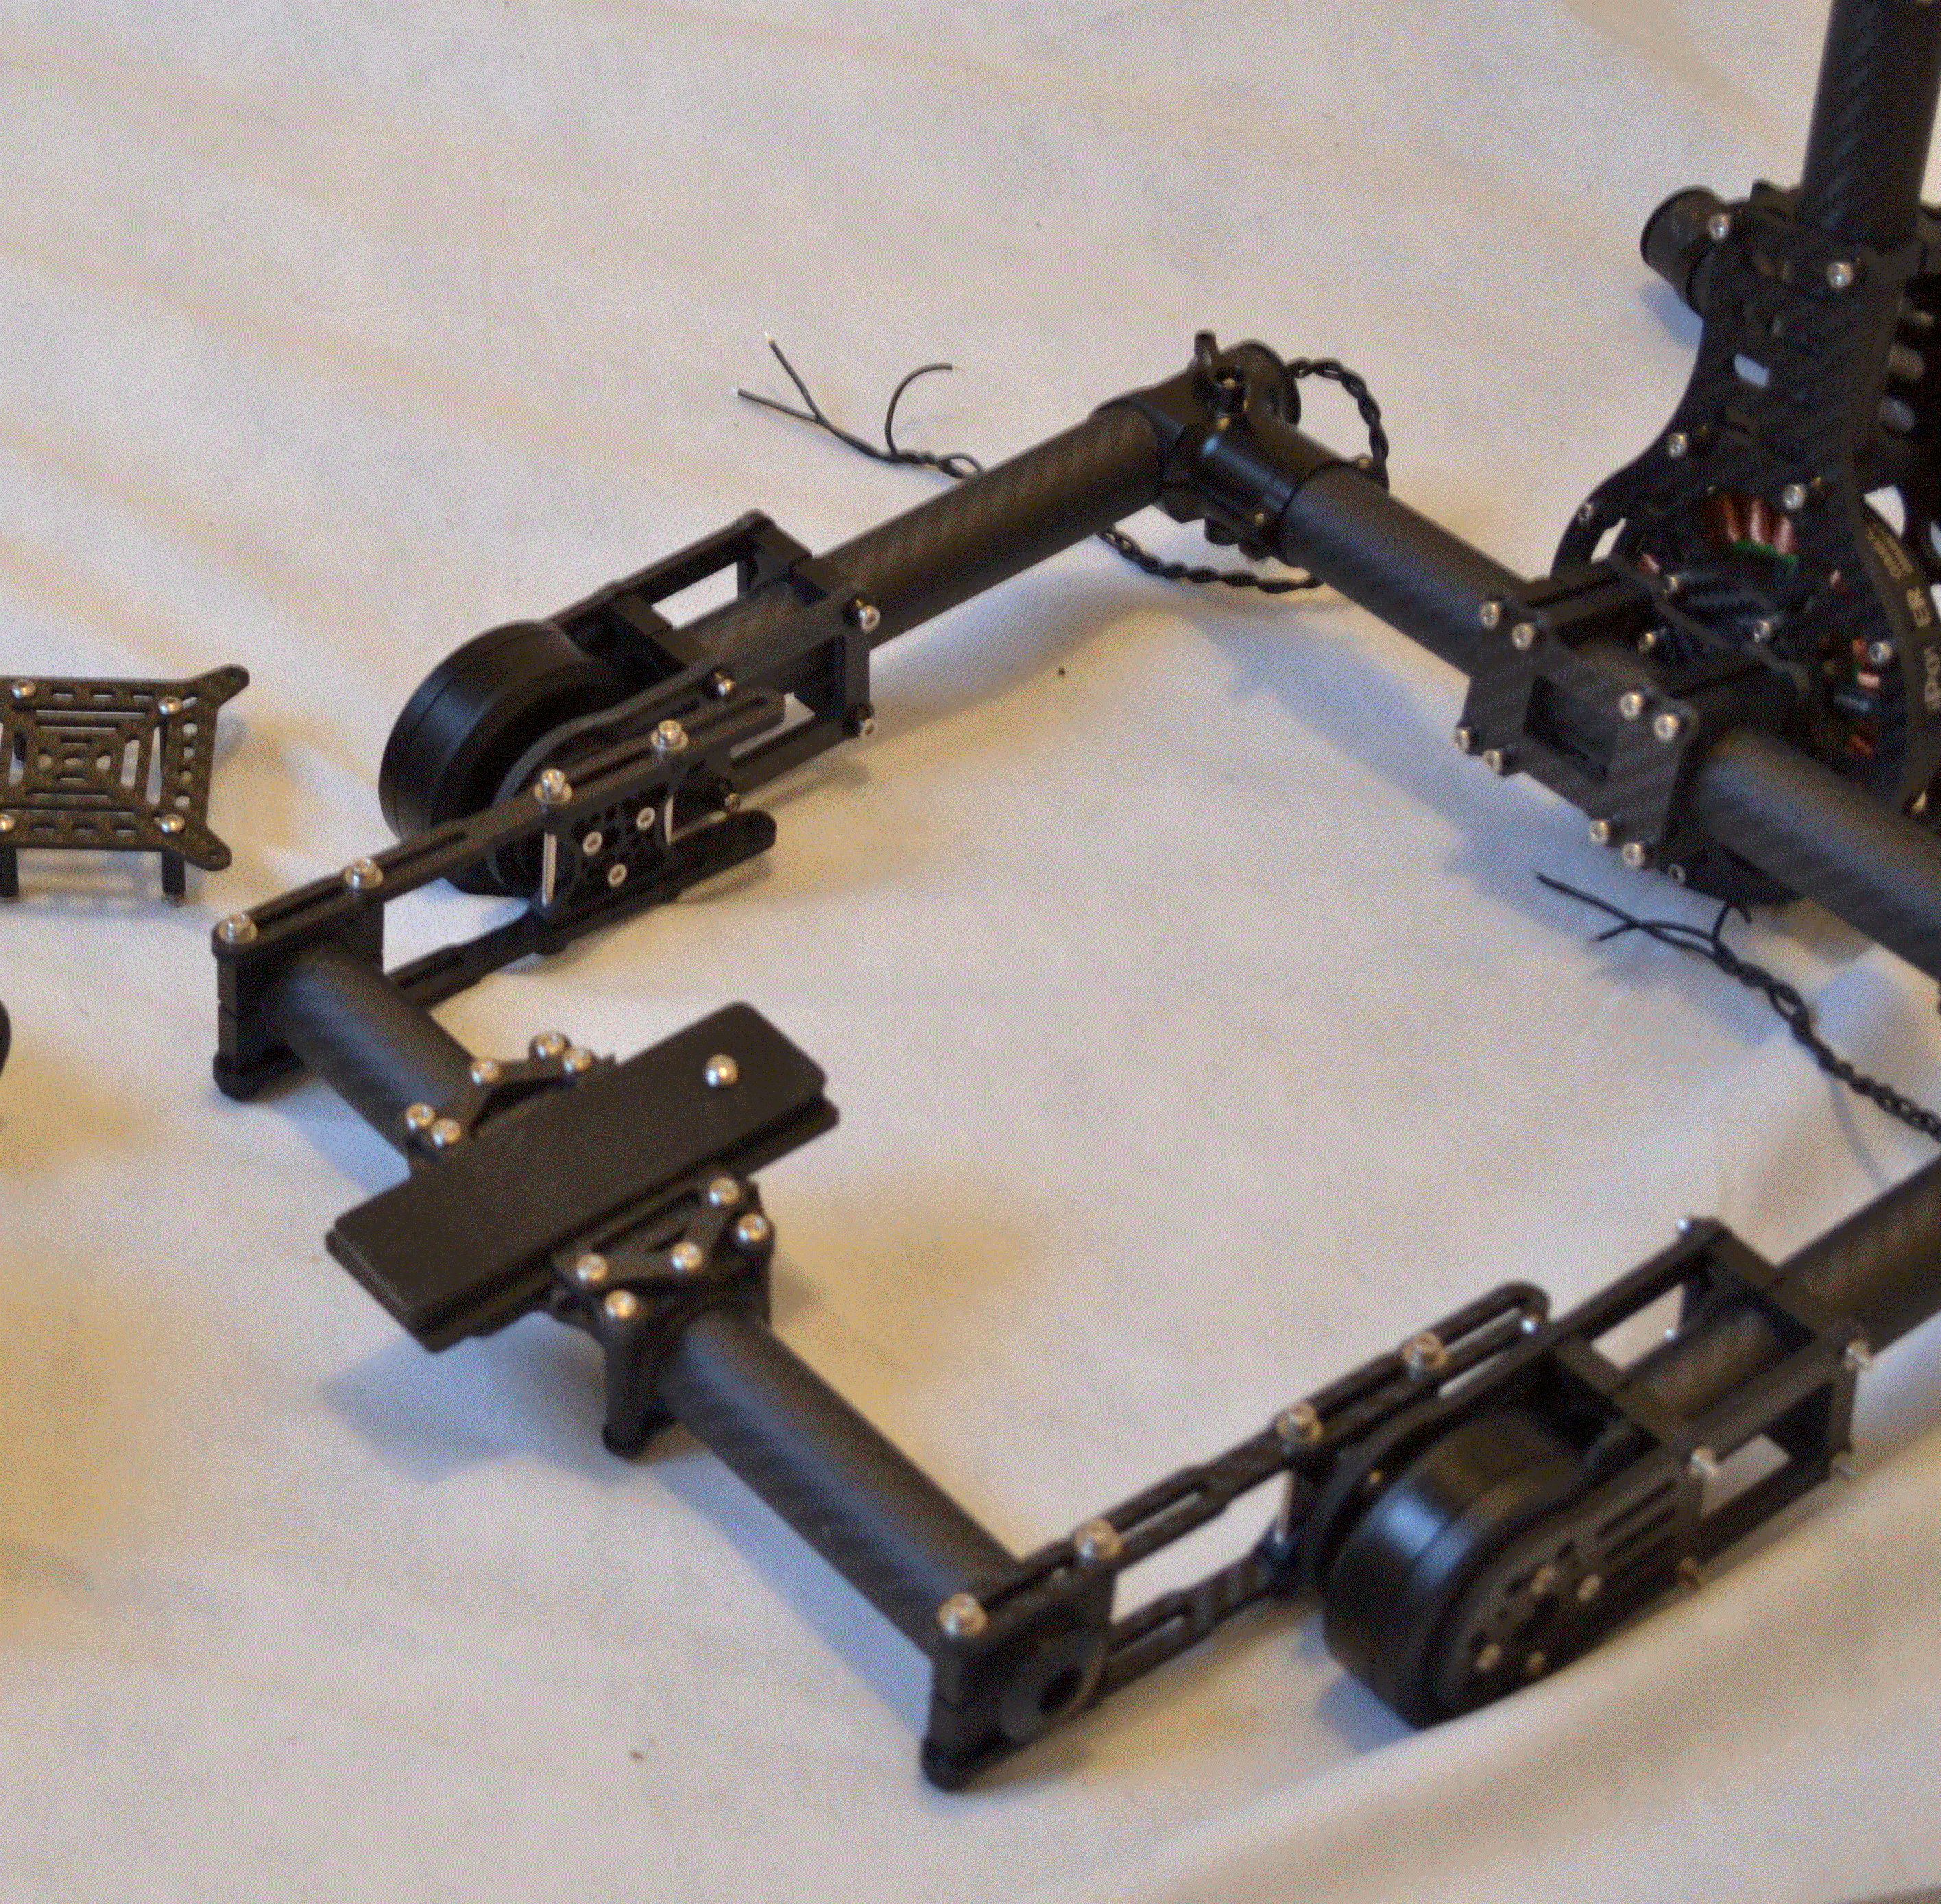 2 axis Brushless gimbal OFFTHEGRIDWATER.CA